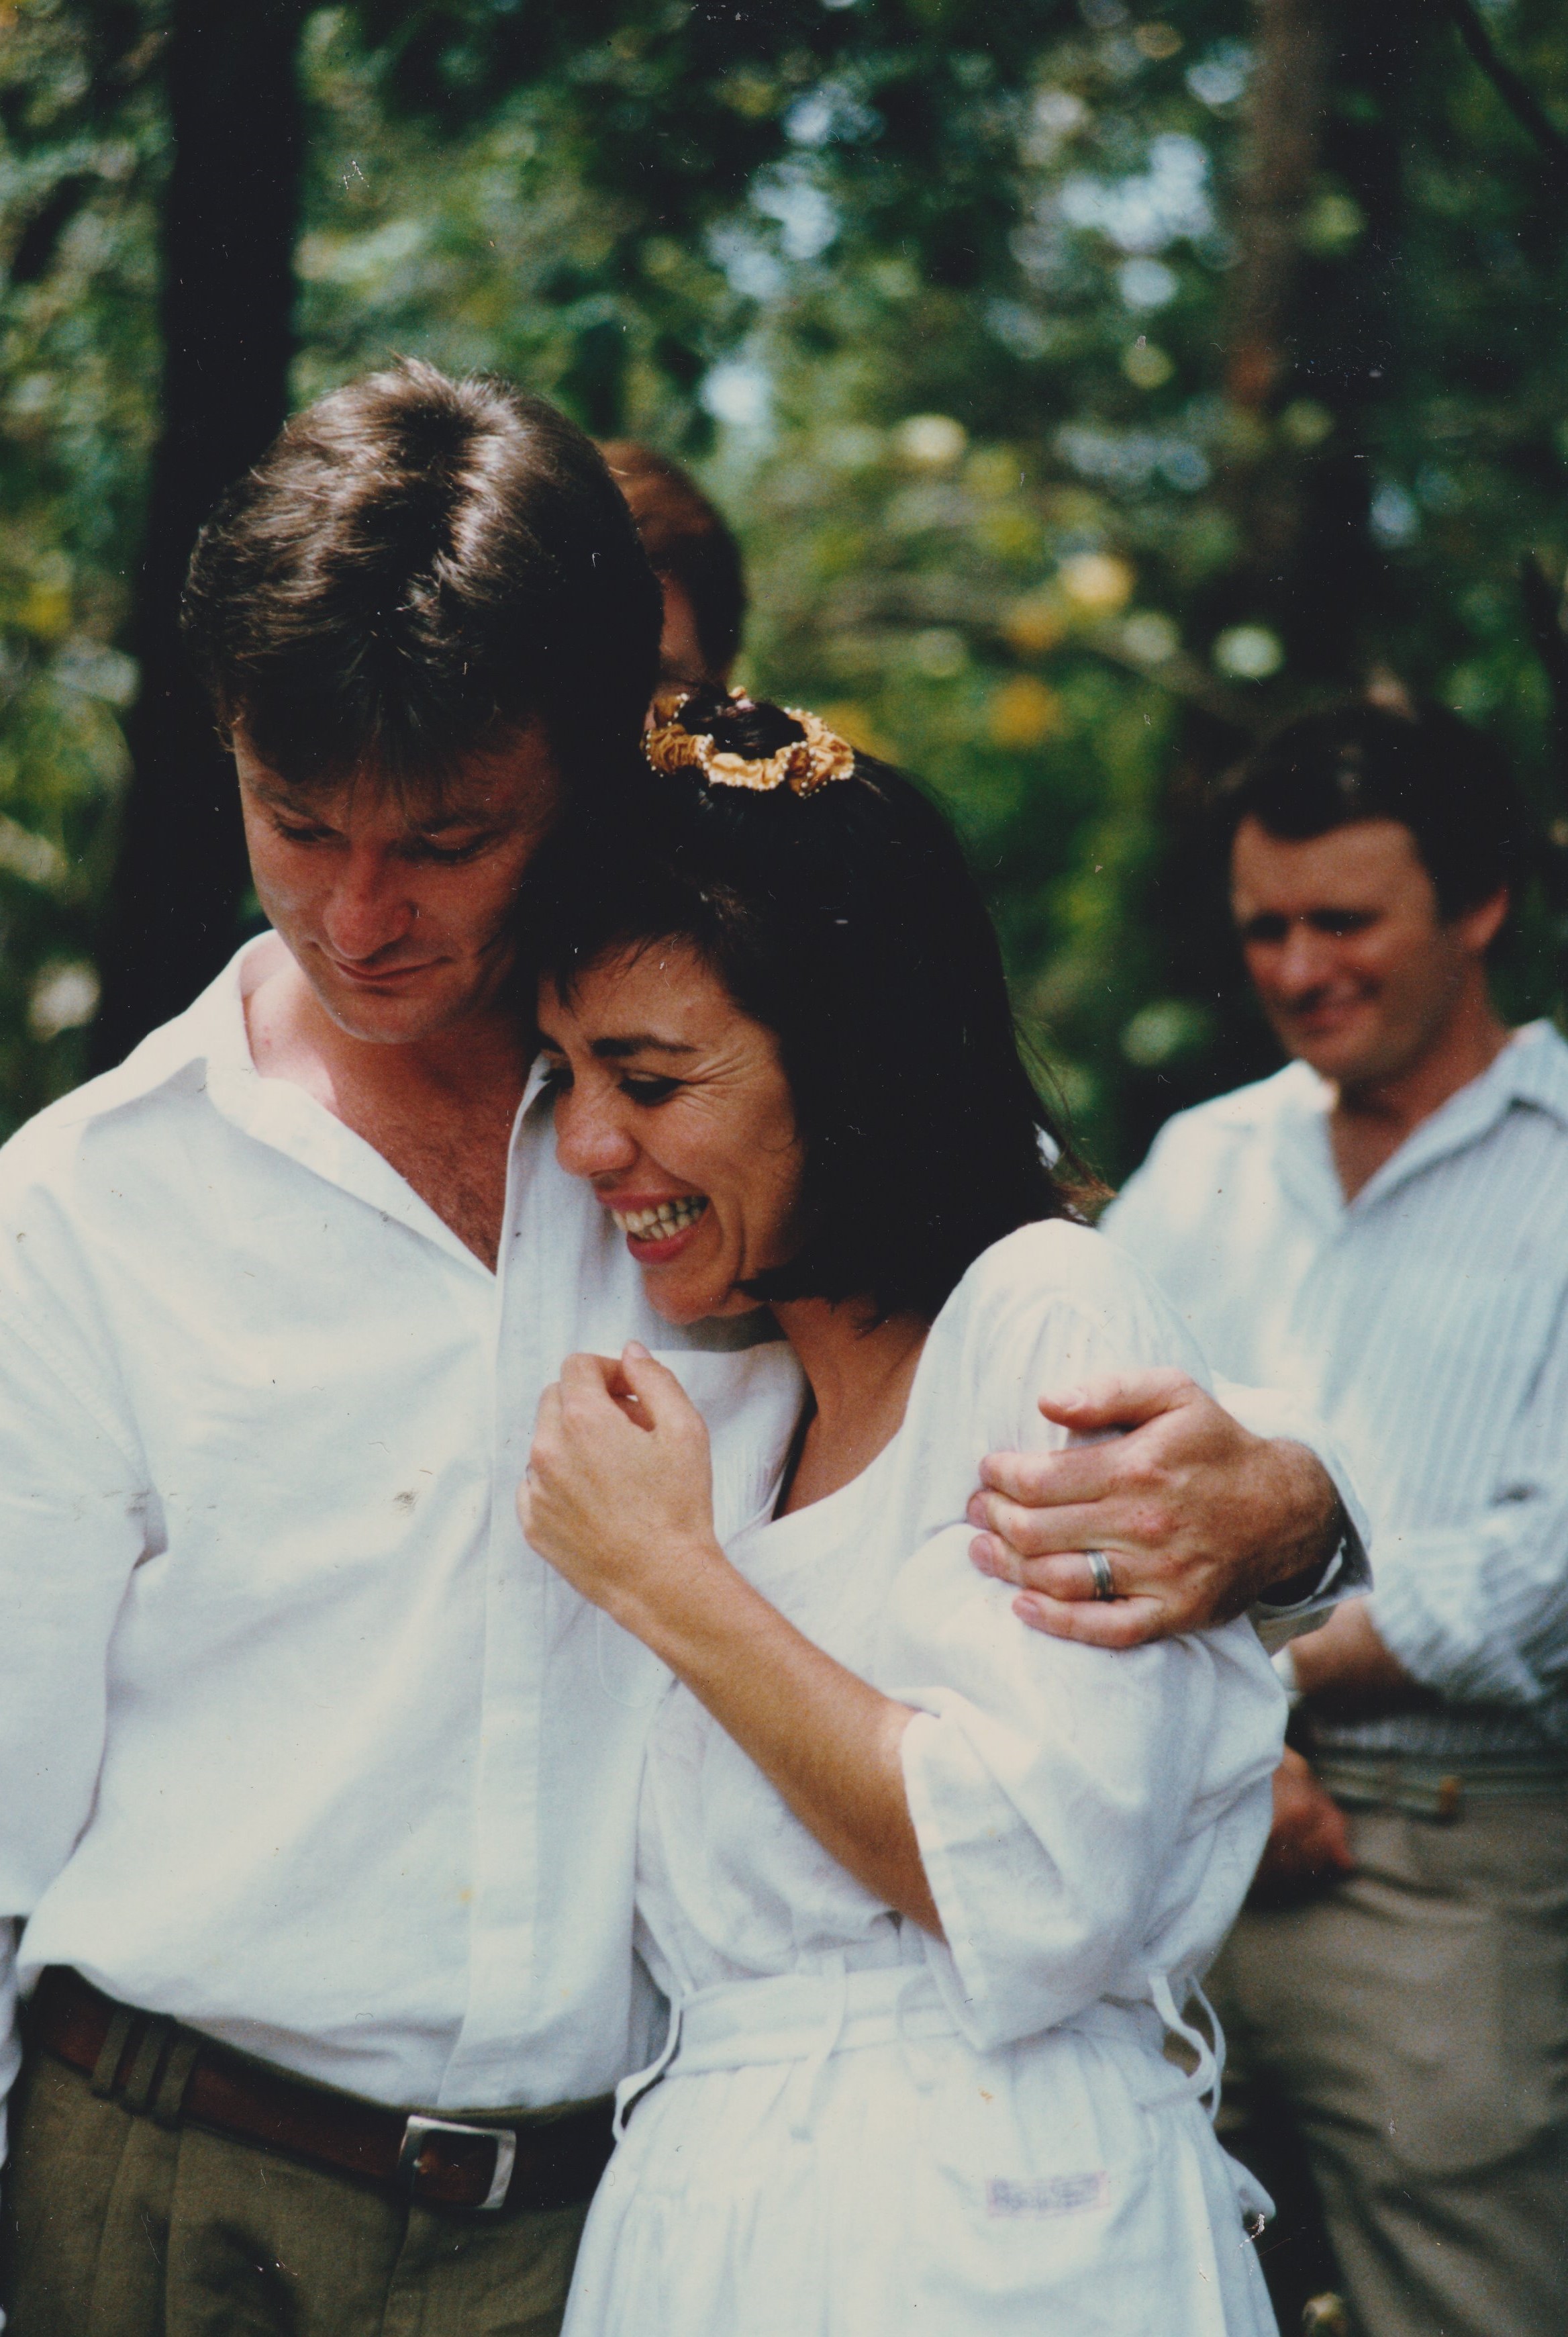 A man and woman dressed in white hold each other smiling.